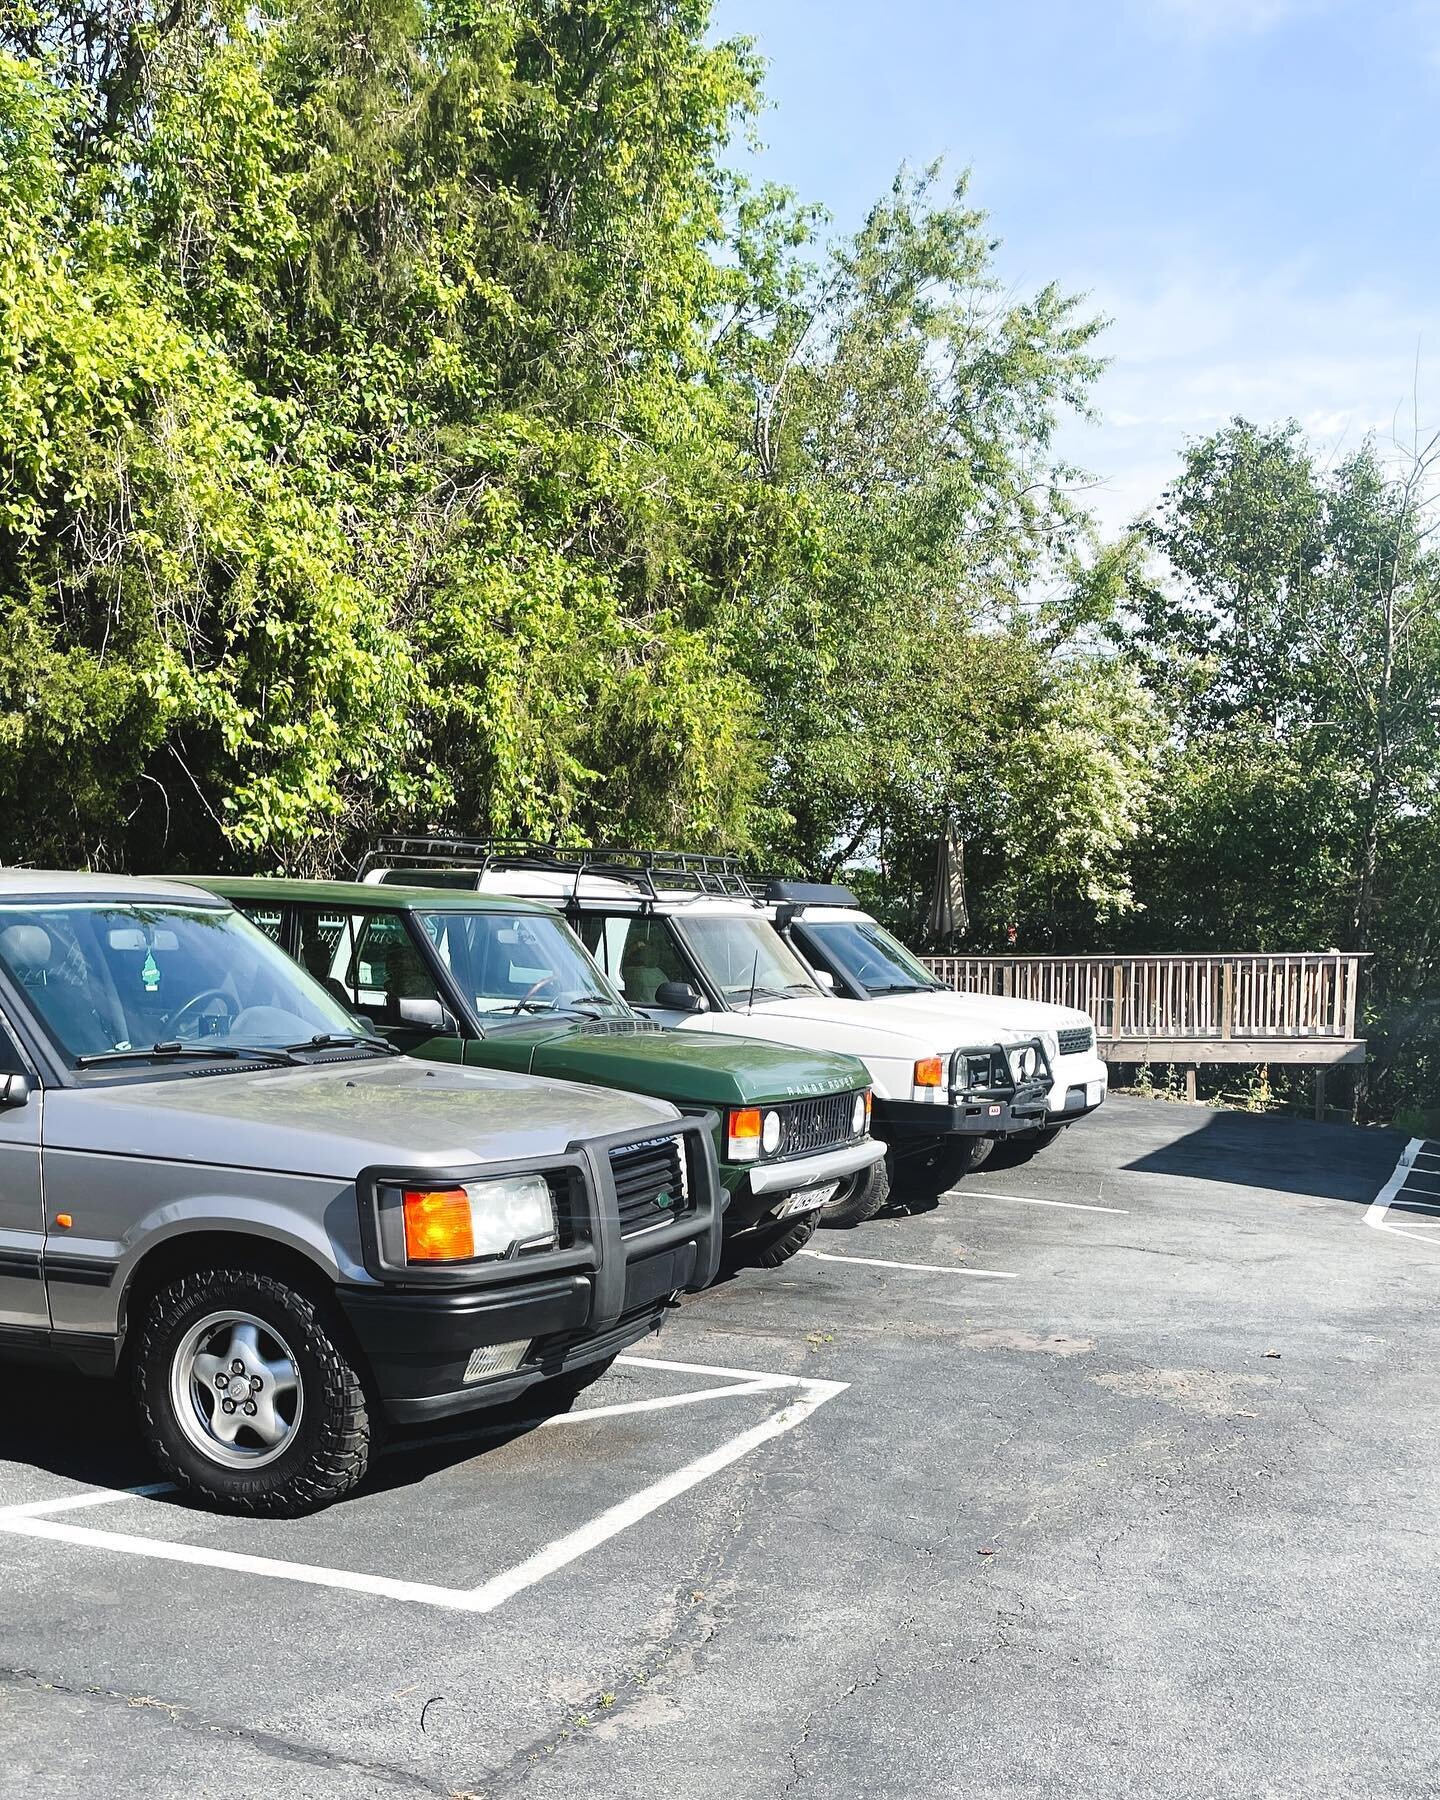 That&rsquo;s a lot of oil leaks in one picture. 

#landrover #rangerover #discovery1 #wsnc #camelcityrovers